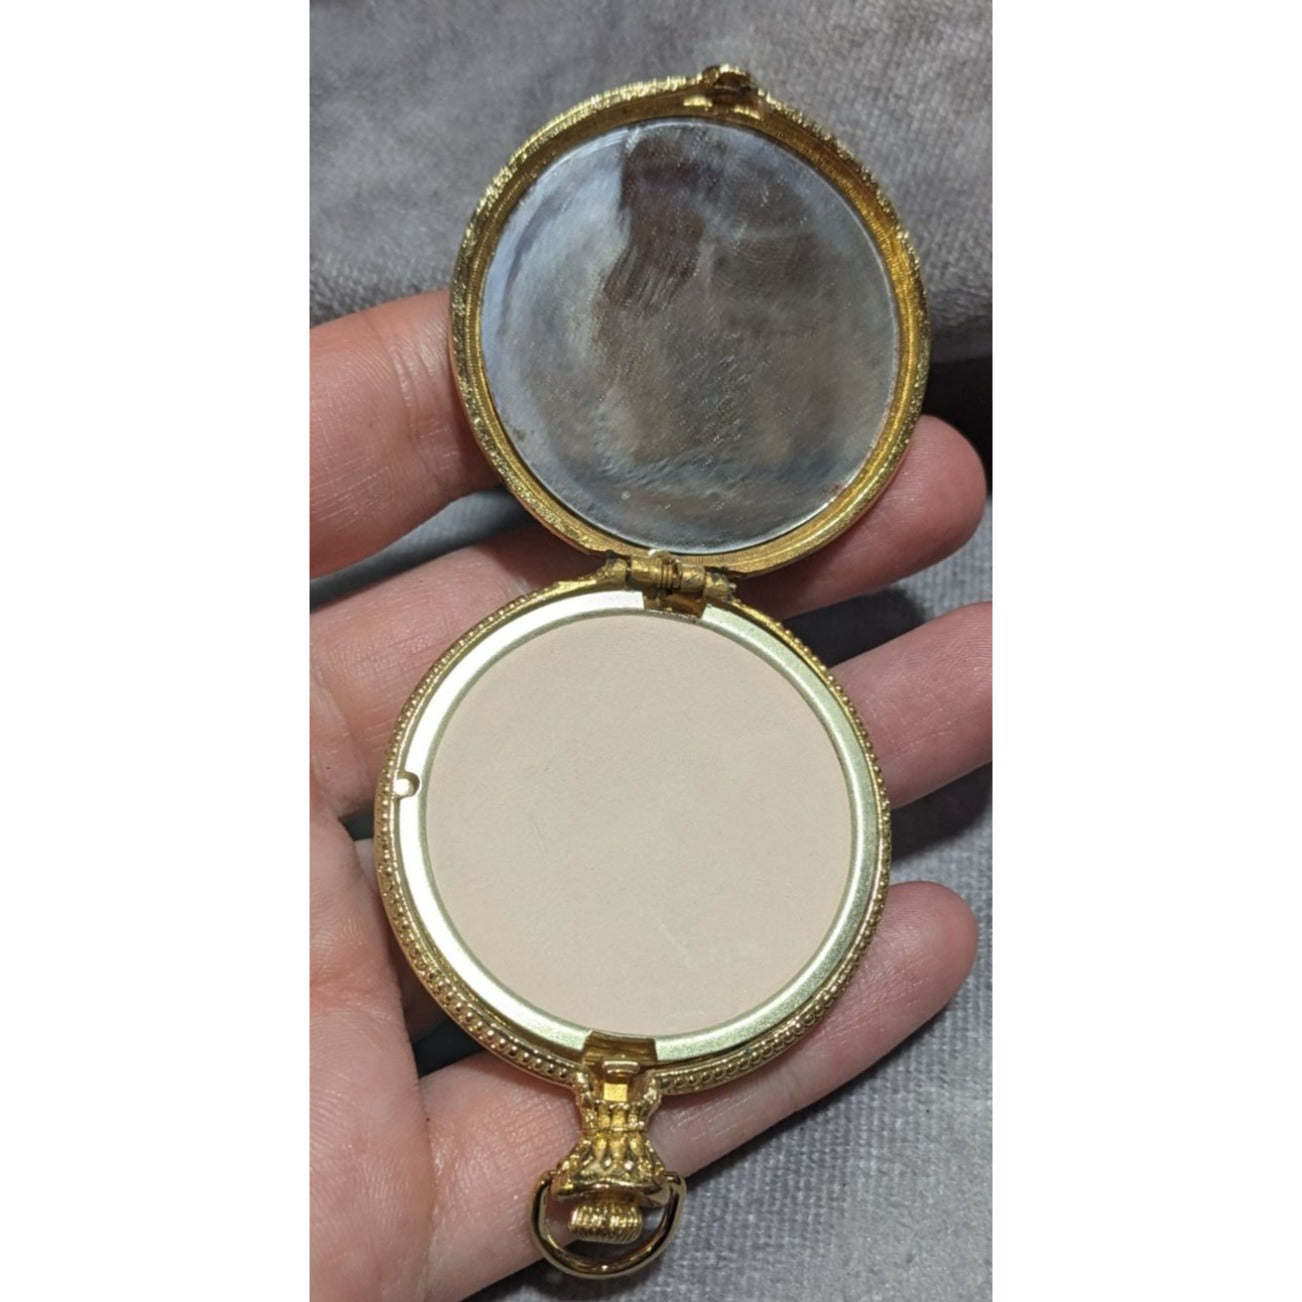 Vintage Gold Pocket Watch Compact